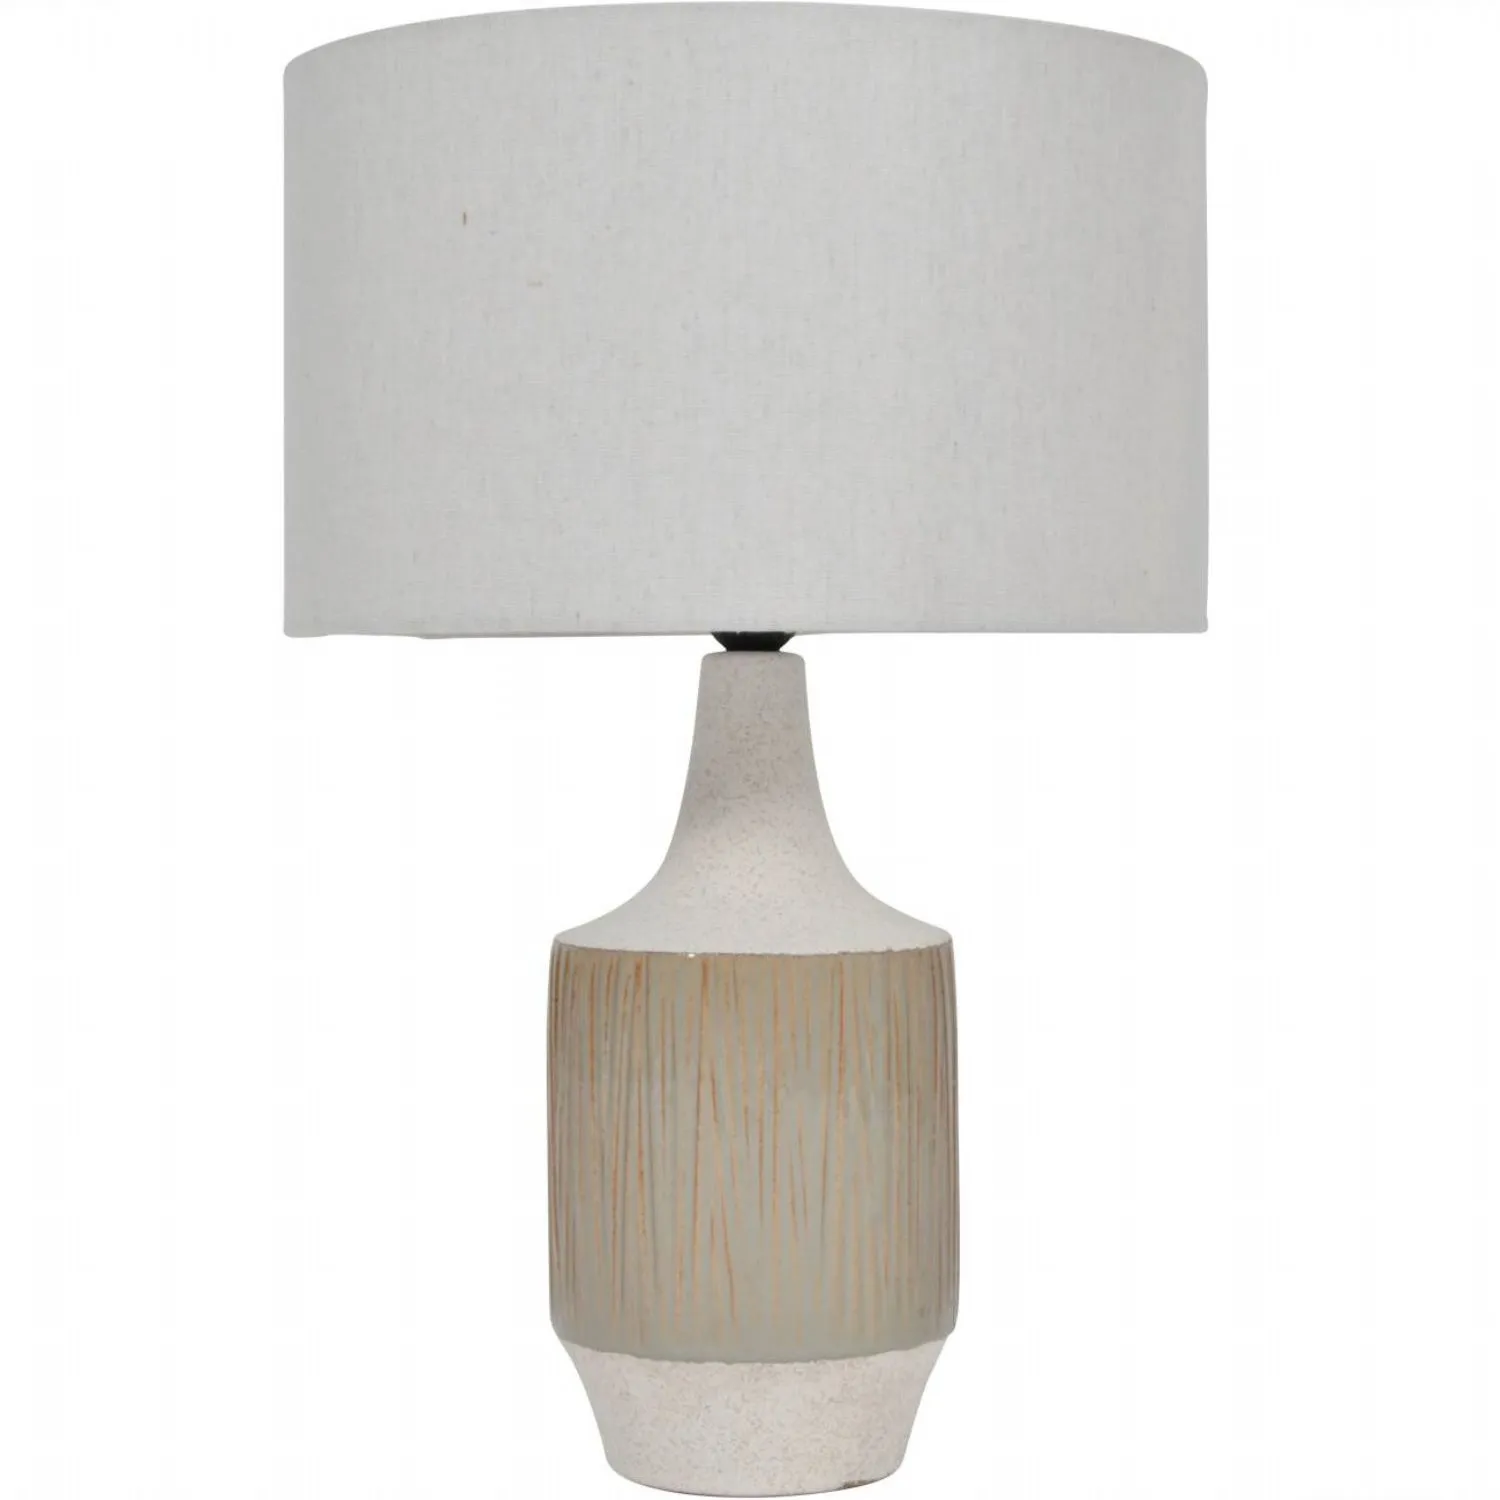 Porcelain Reeds Lamp With Shade E27 60W